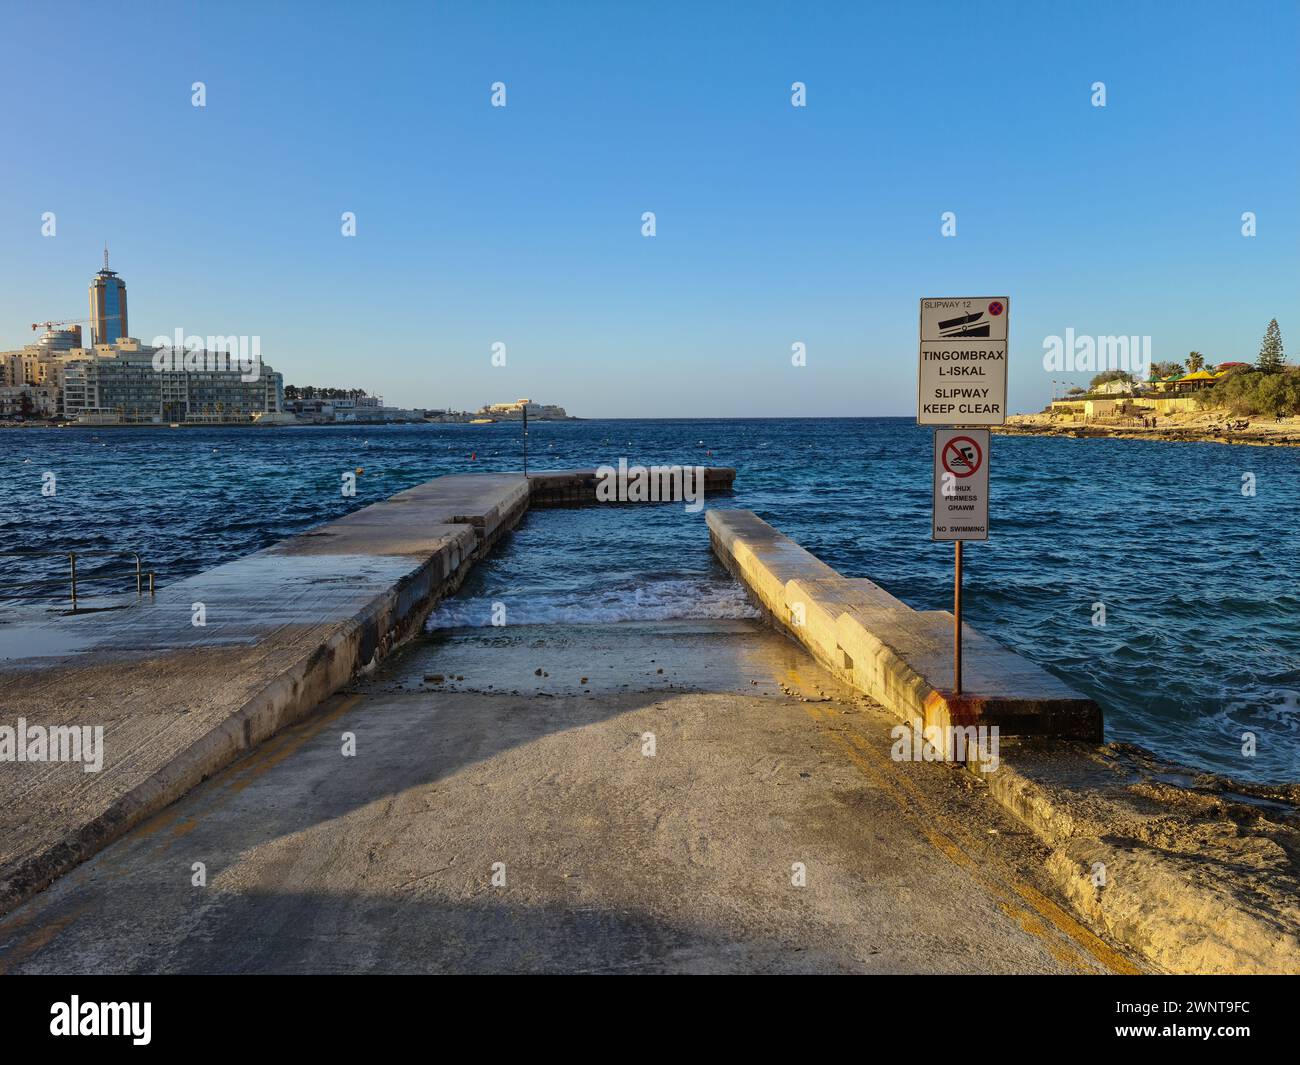 Exiles Bay, Sliema, Malta -March 15th 2021: Jetty and slipway with view of St Julian’s Bay in between San Giljan and Sliema. Stock Photo